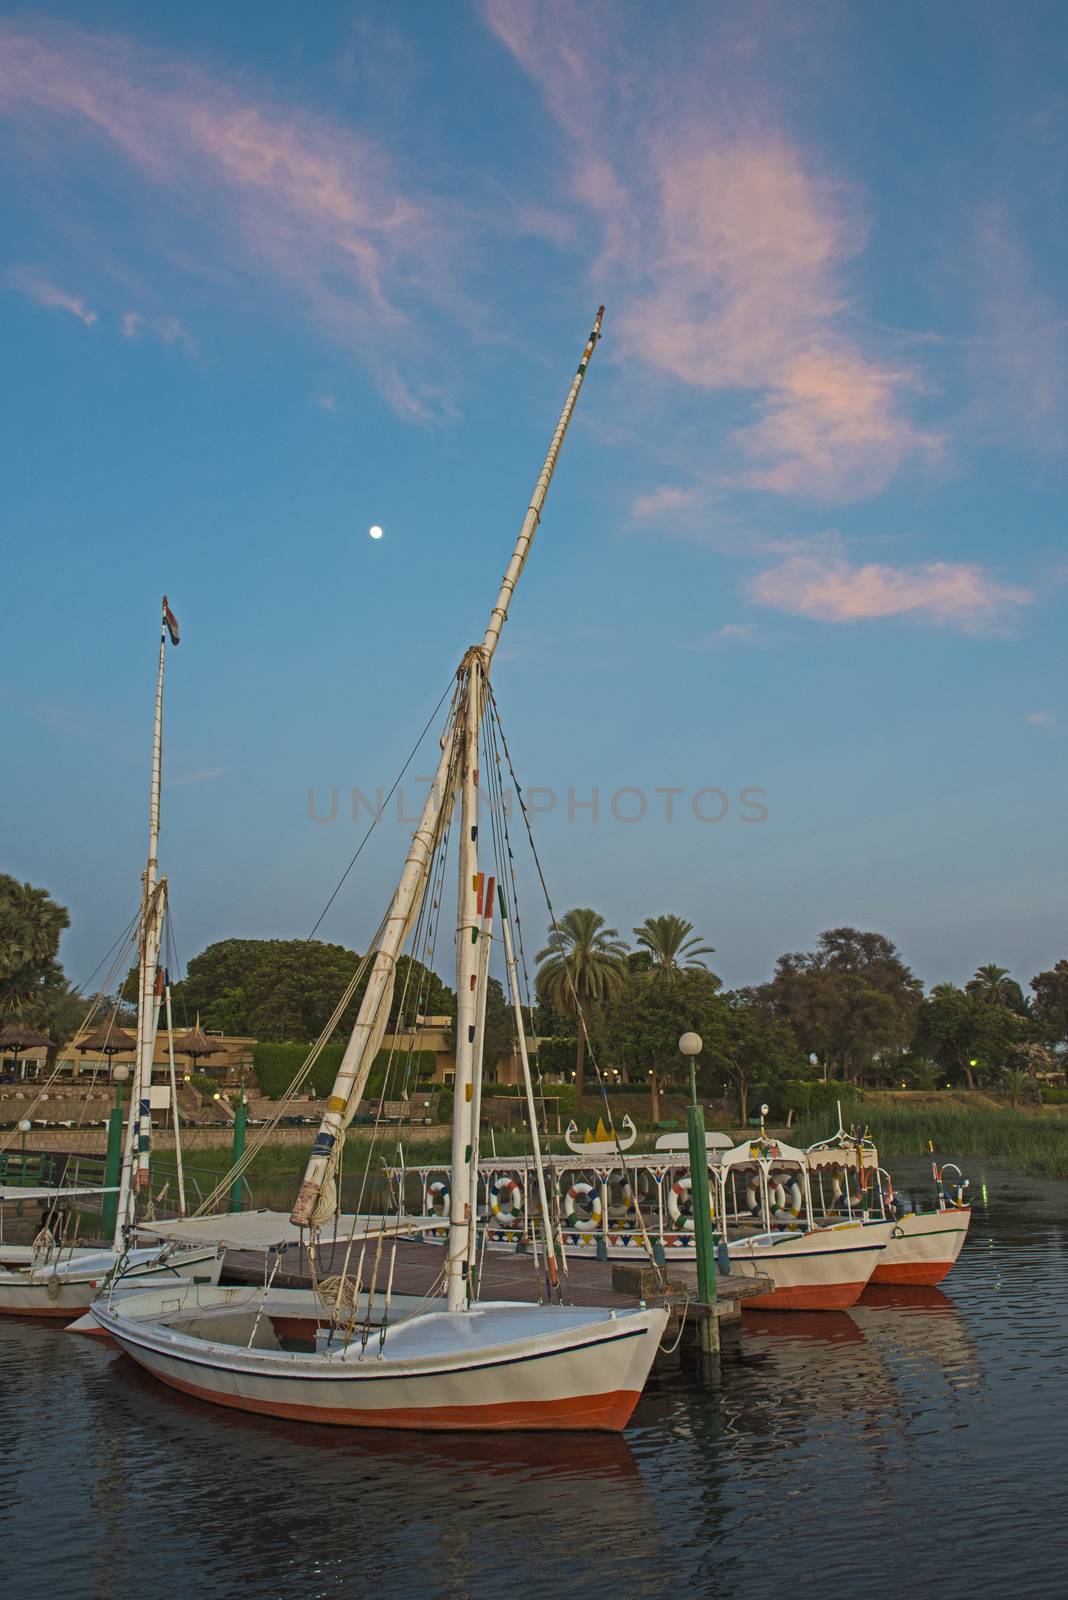 Traditional Egyptian wooden felluca boats moored at a small jetty in the evening on tropical river bank